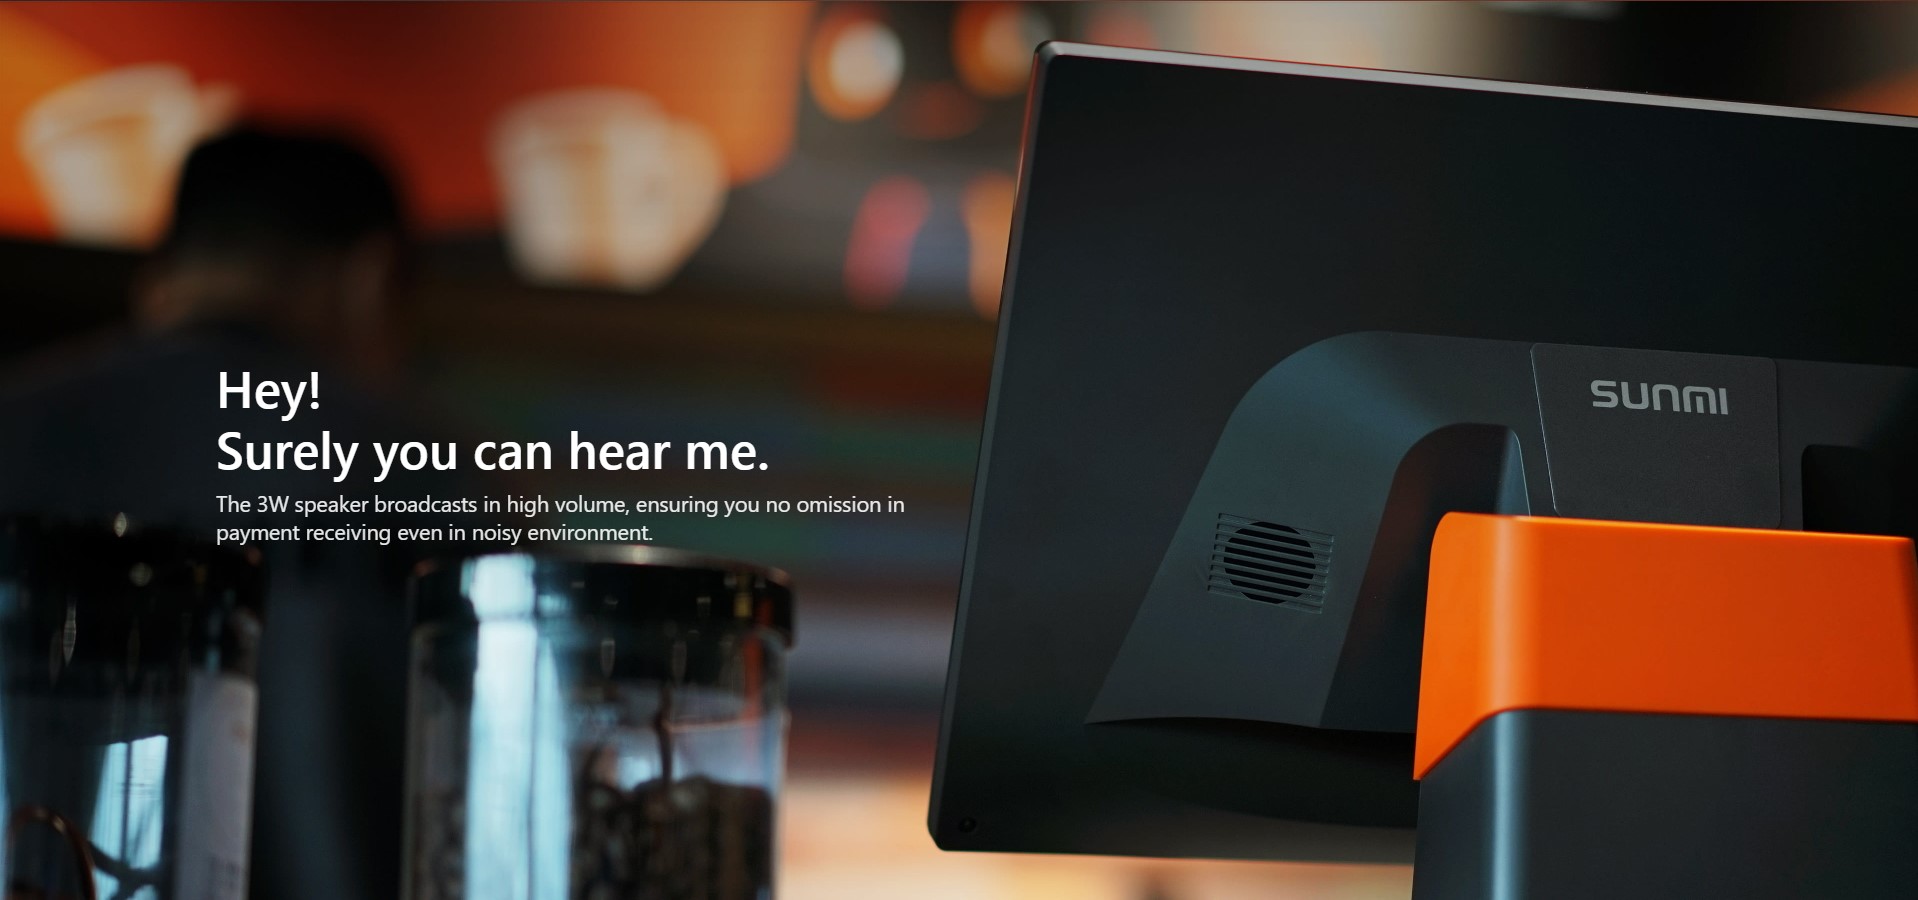 Hey! Surely you can hear me. The 3W speaker broadcasts in high volume, ensuring you no omission in payment receiving even in noisy environment.